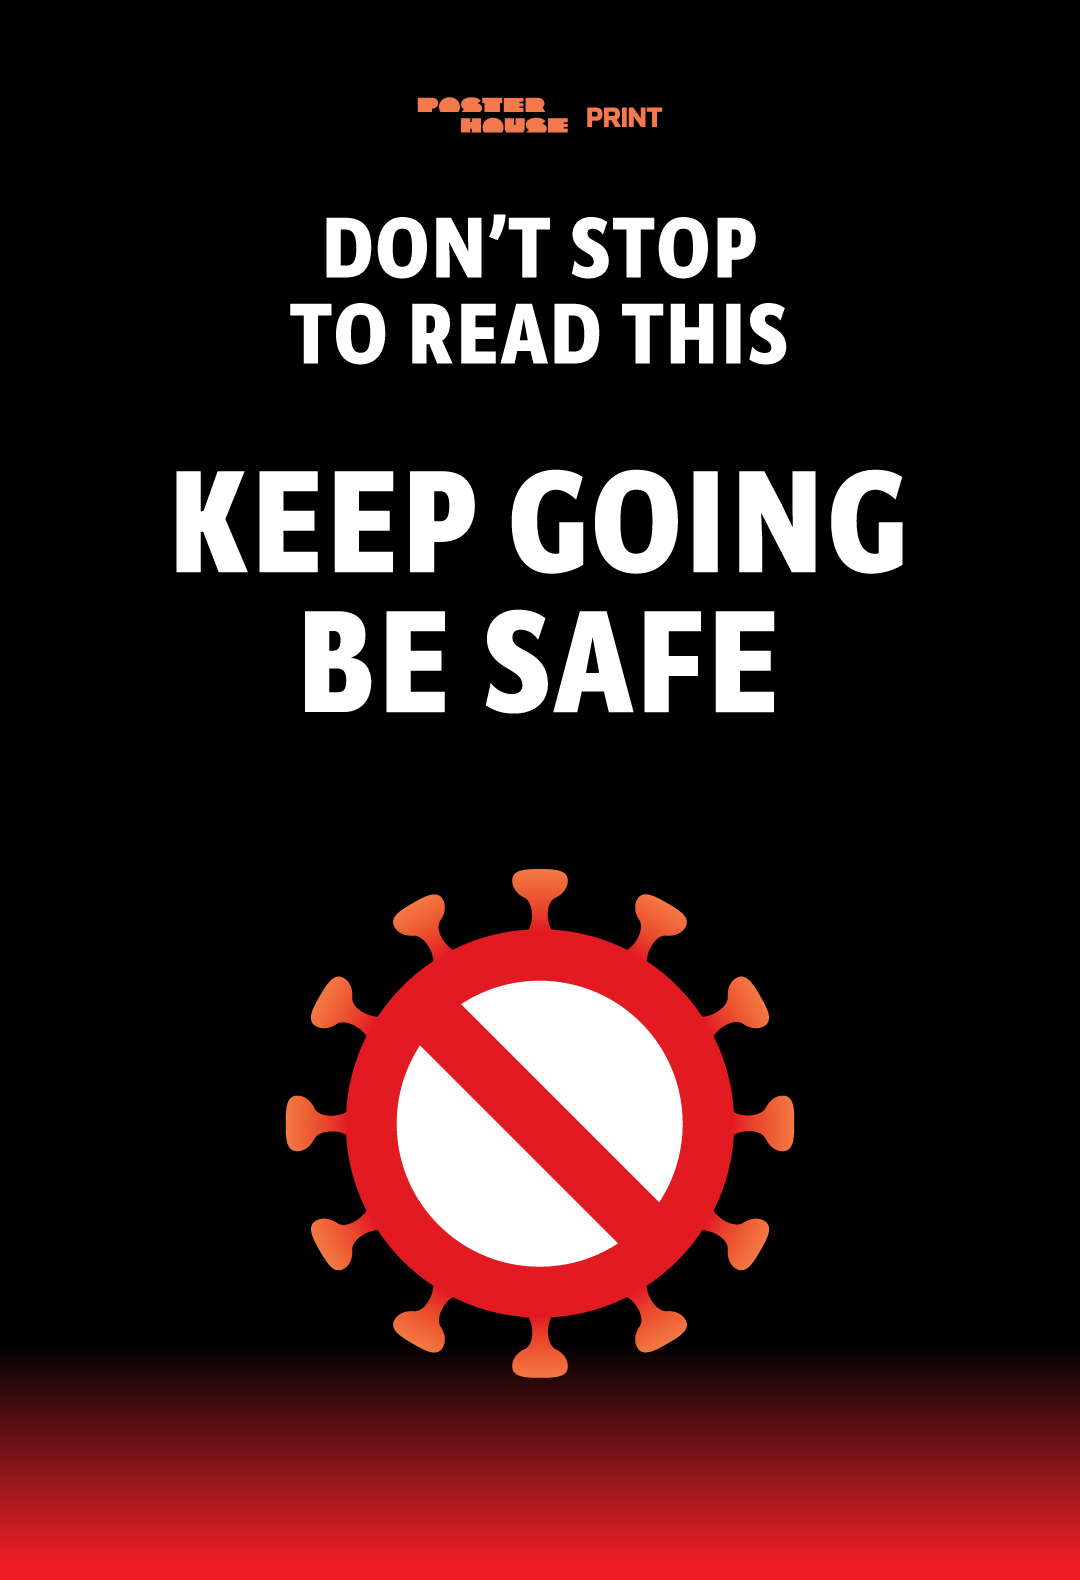 A type based PSA poster featuring a coronavirus particle with the